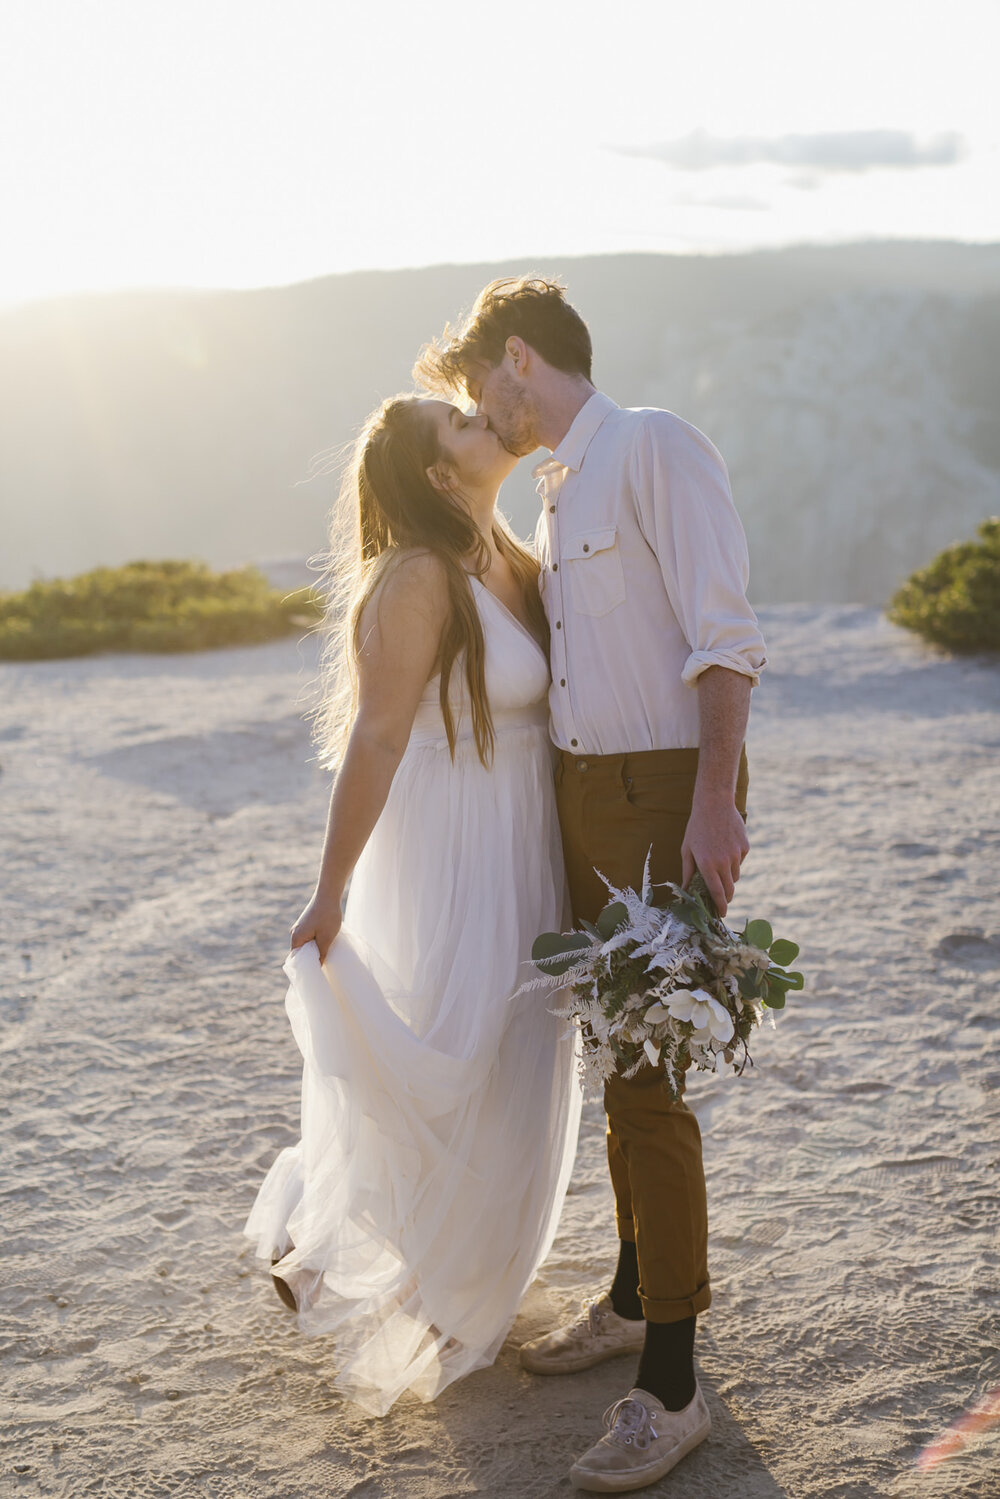 Wedding couple kiss at Taft Point during their elopement in Yosemite National Park